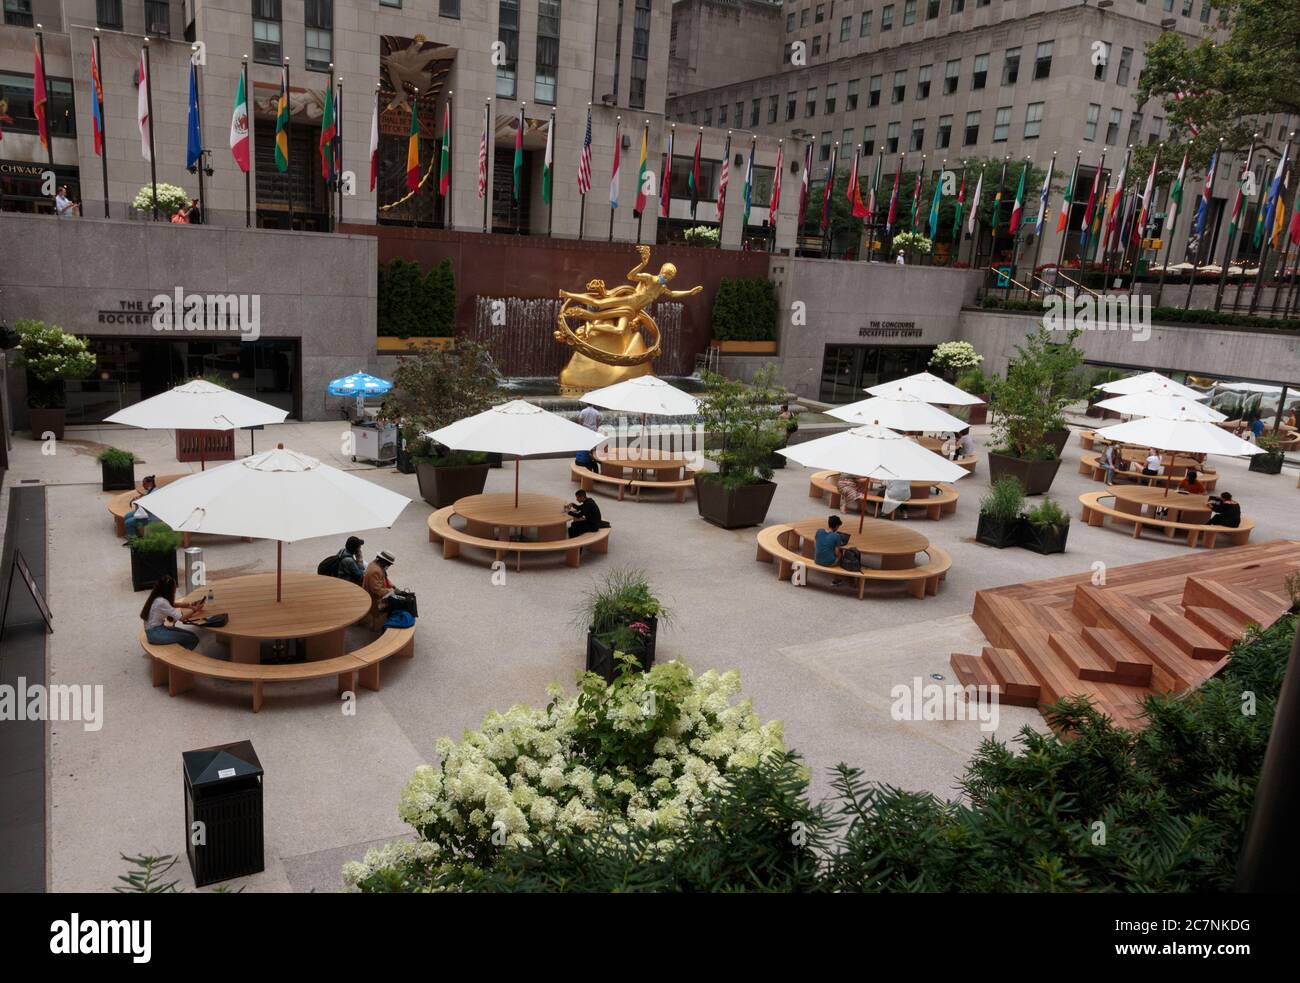 scene at the concourse of the Rockefeller Center during the coronavirus or covid-19 pandemic, with very few people sitting and social distancing Stock Photo